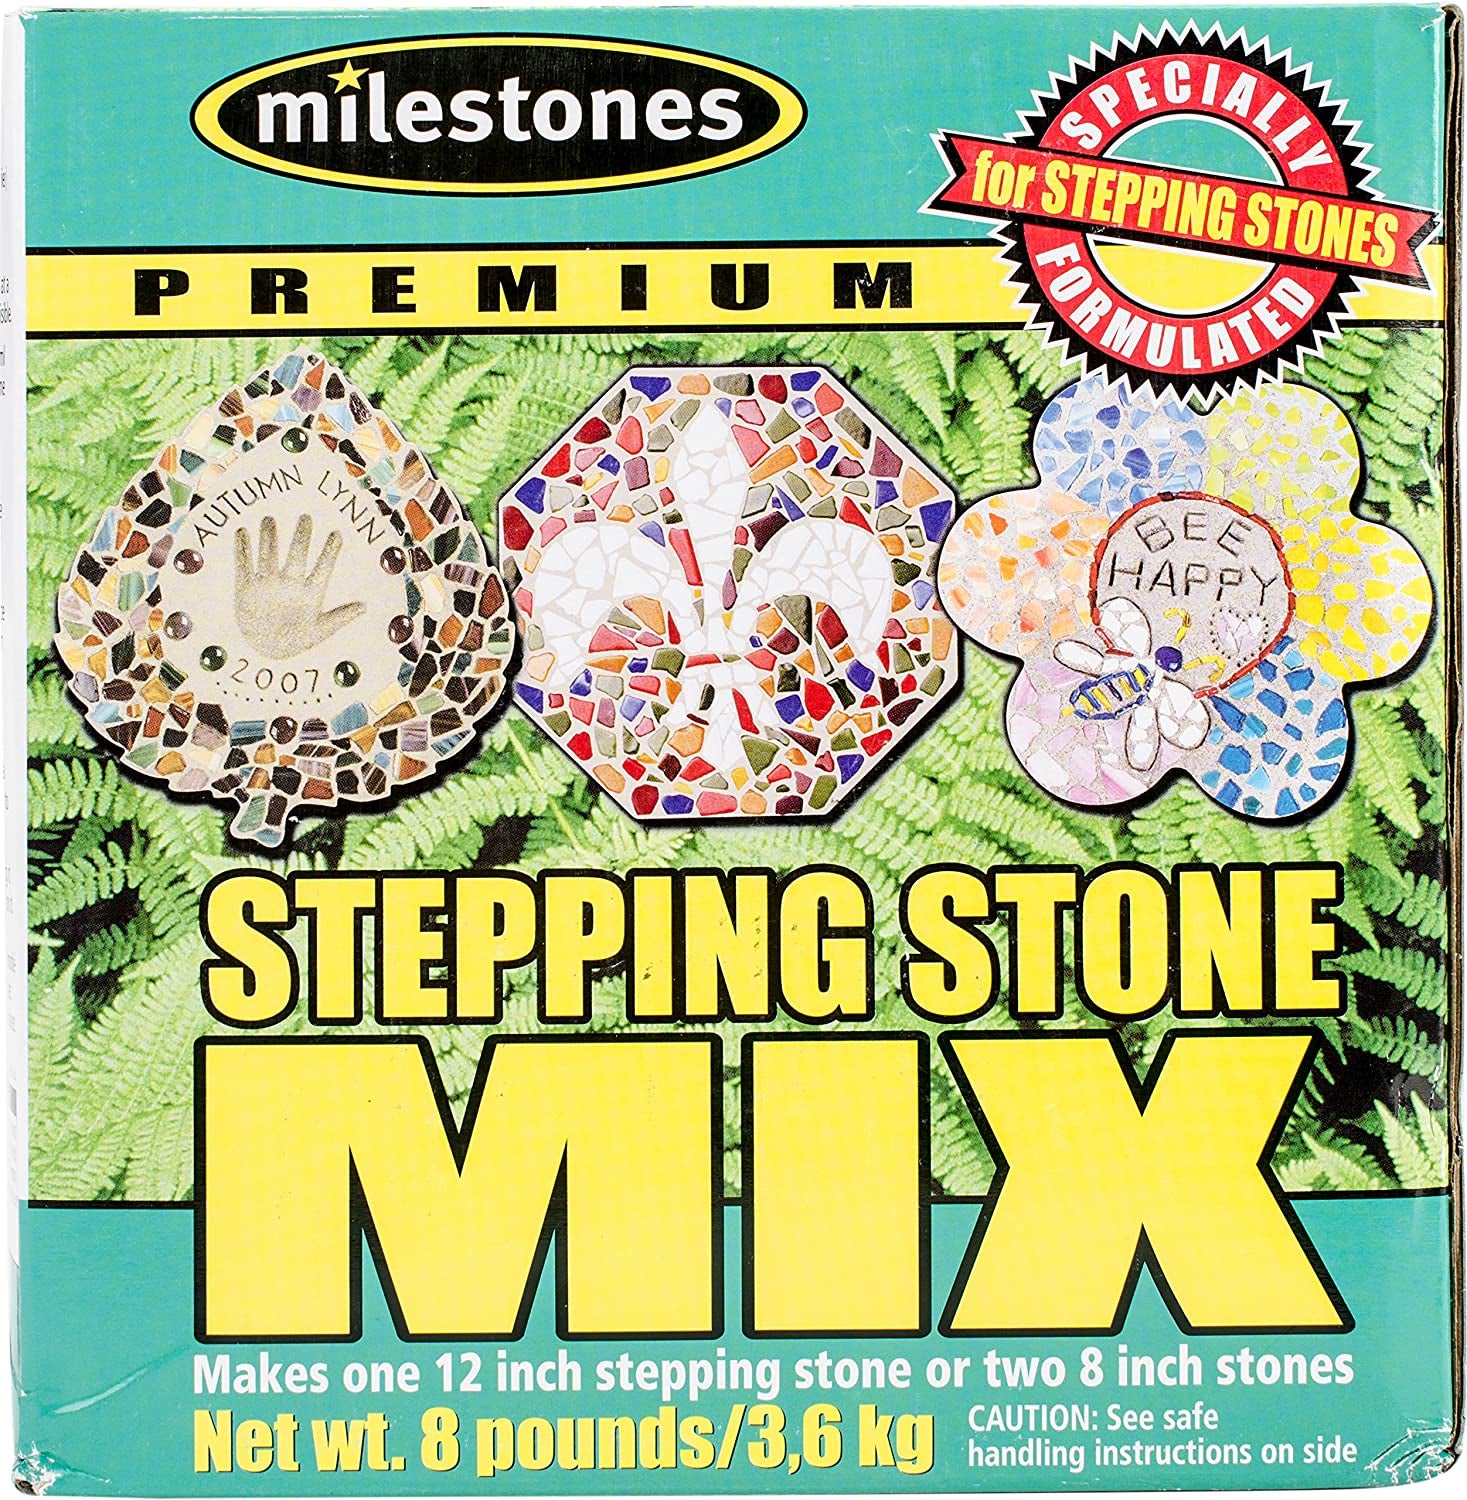 Midwest Products Co., Milestones Premium Stepping Stone Cement Mix 8 Pound Box for Stepping Stone Kits - 903-16102